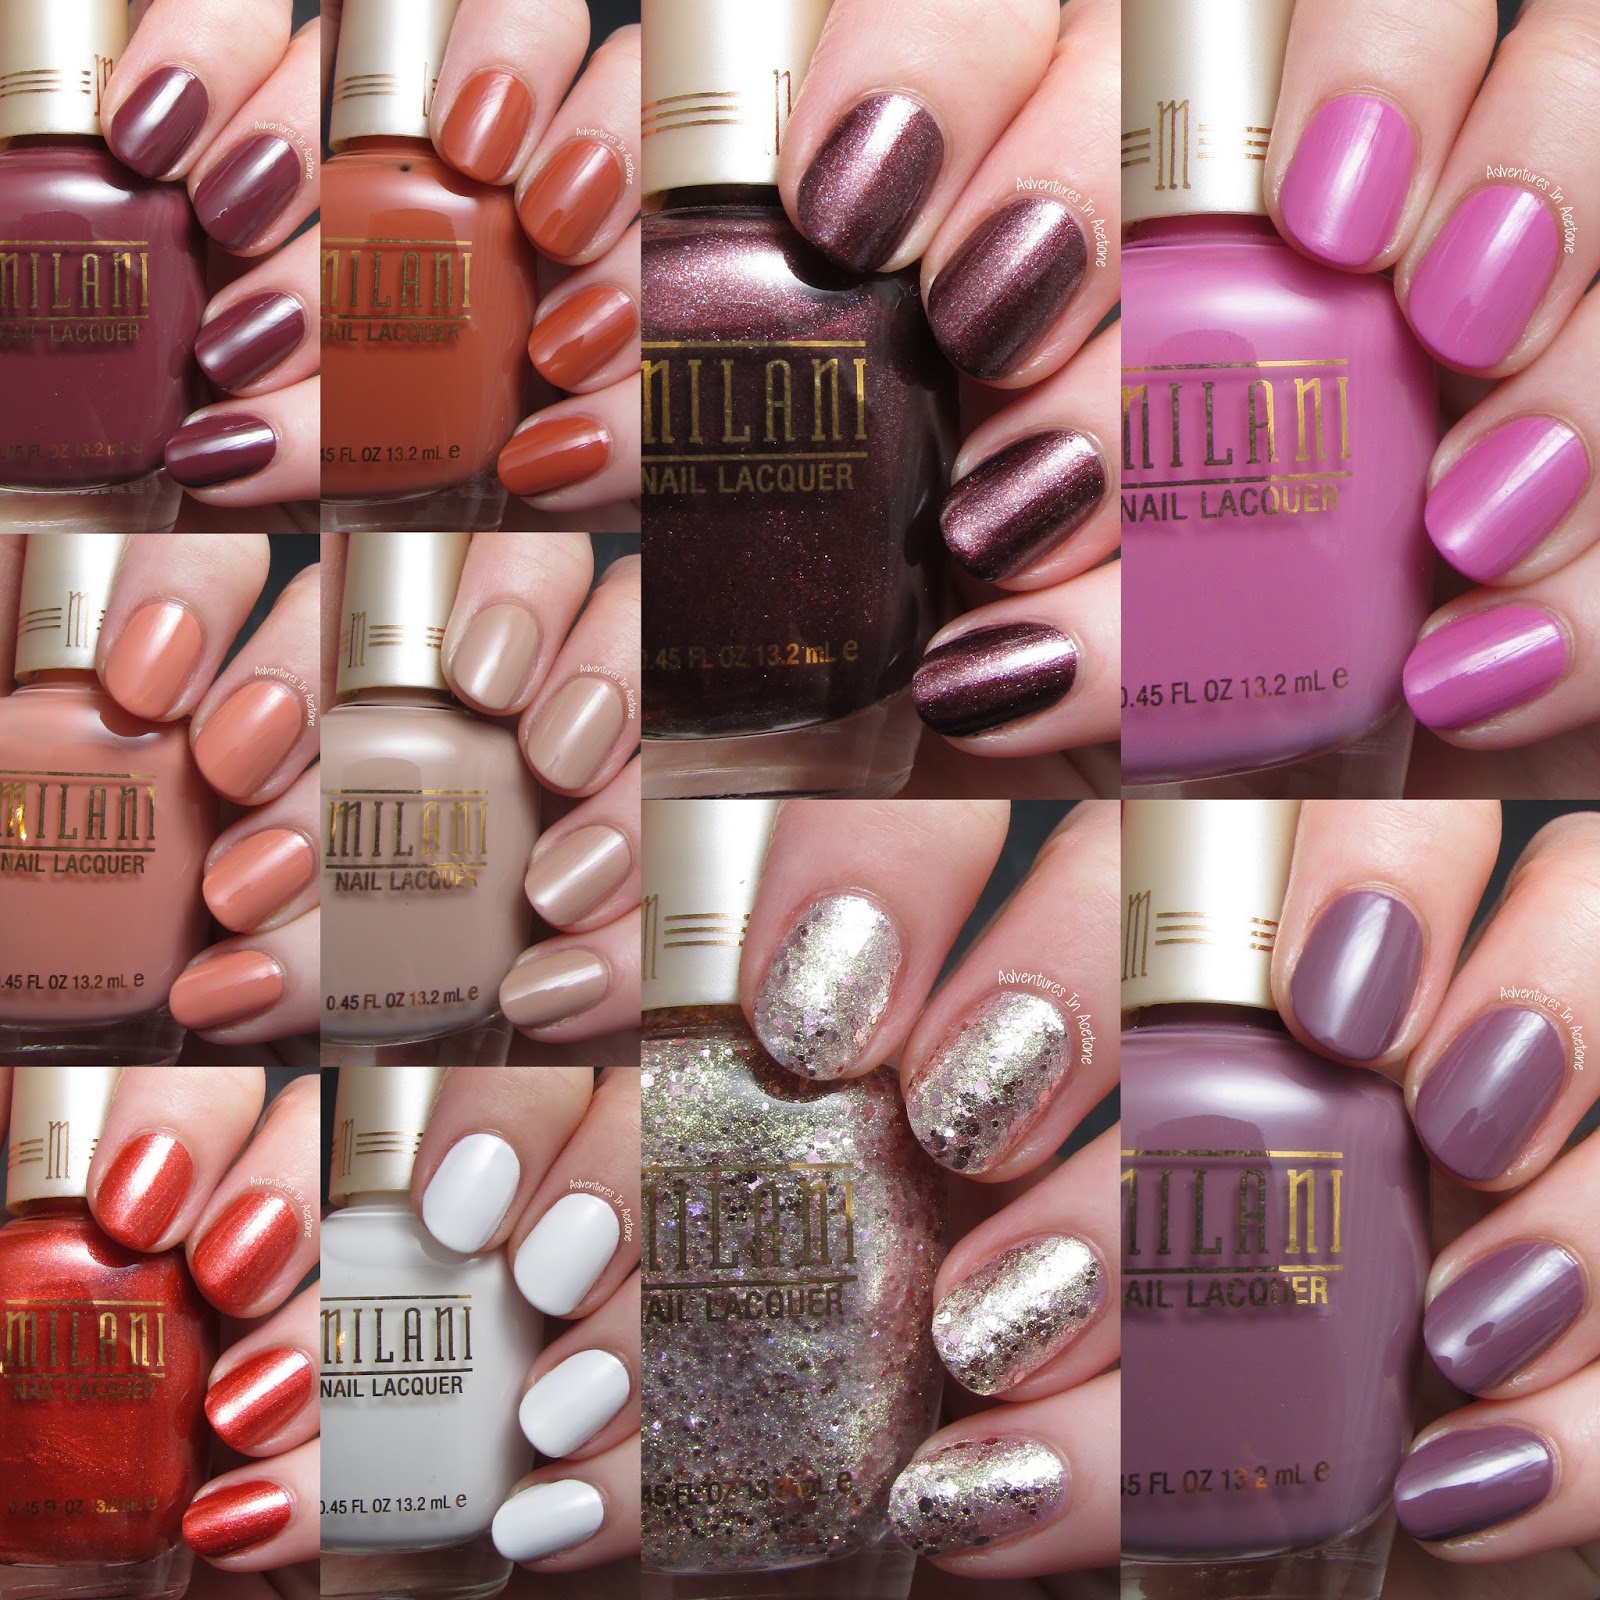 Orly Plastix Satin Finish Nail Polish Swatches & Review : All Lacquered Up